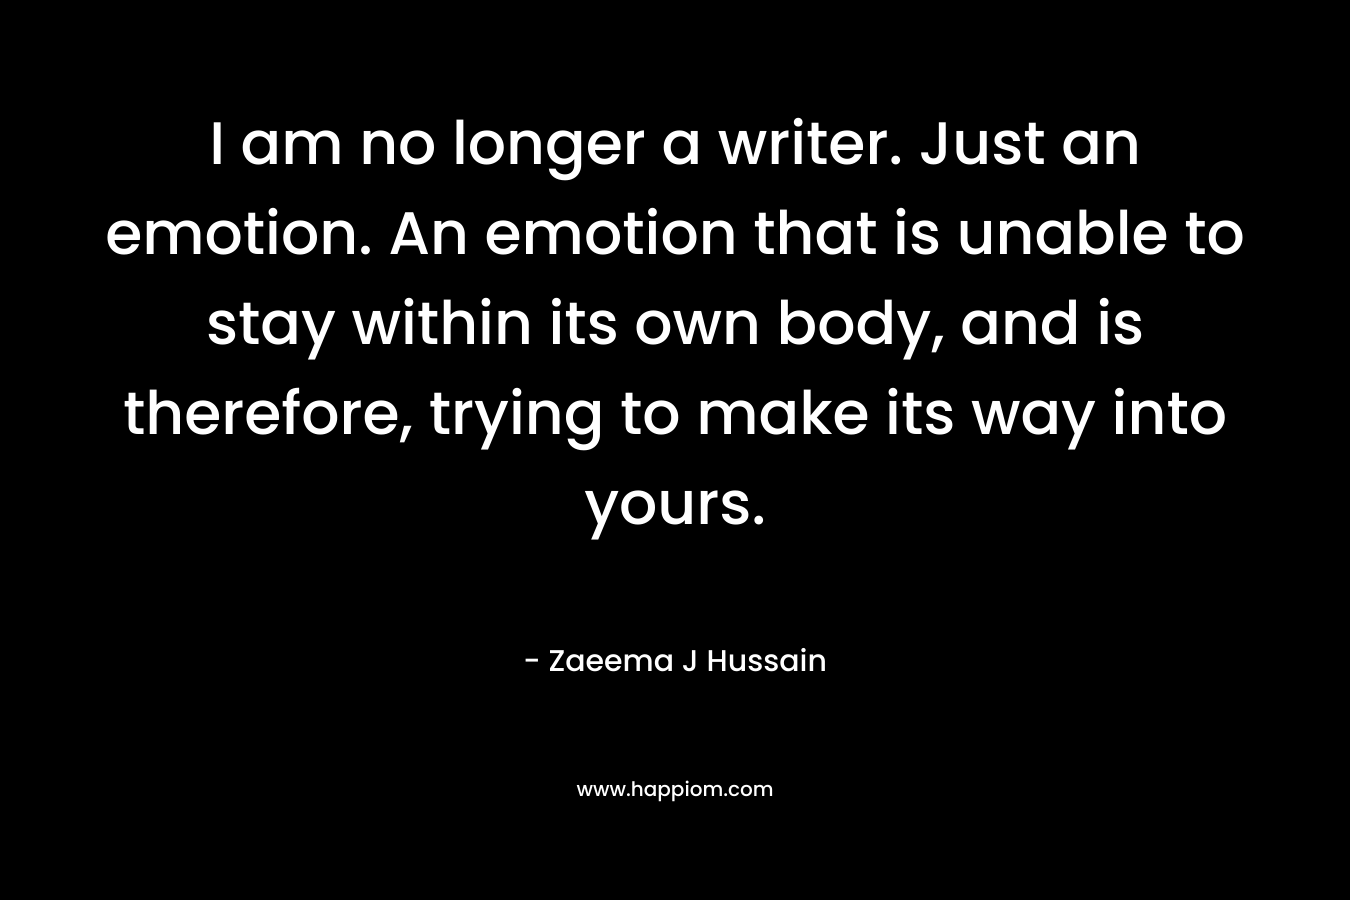 I am no longer a writer. Just an emotion. An emotion that is unable to stay within its own body, and is therefore, trying to make its way into yours.